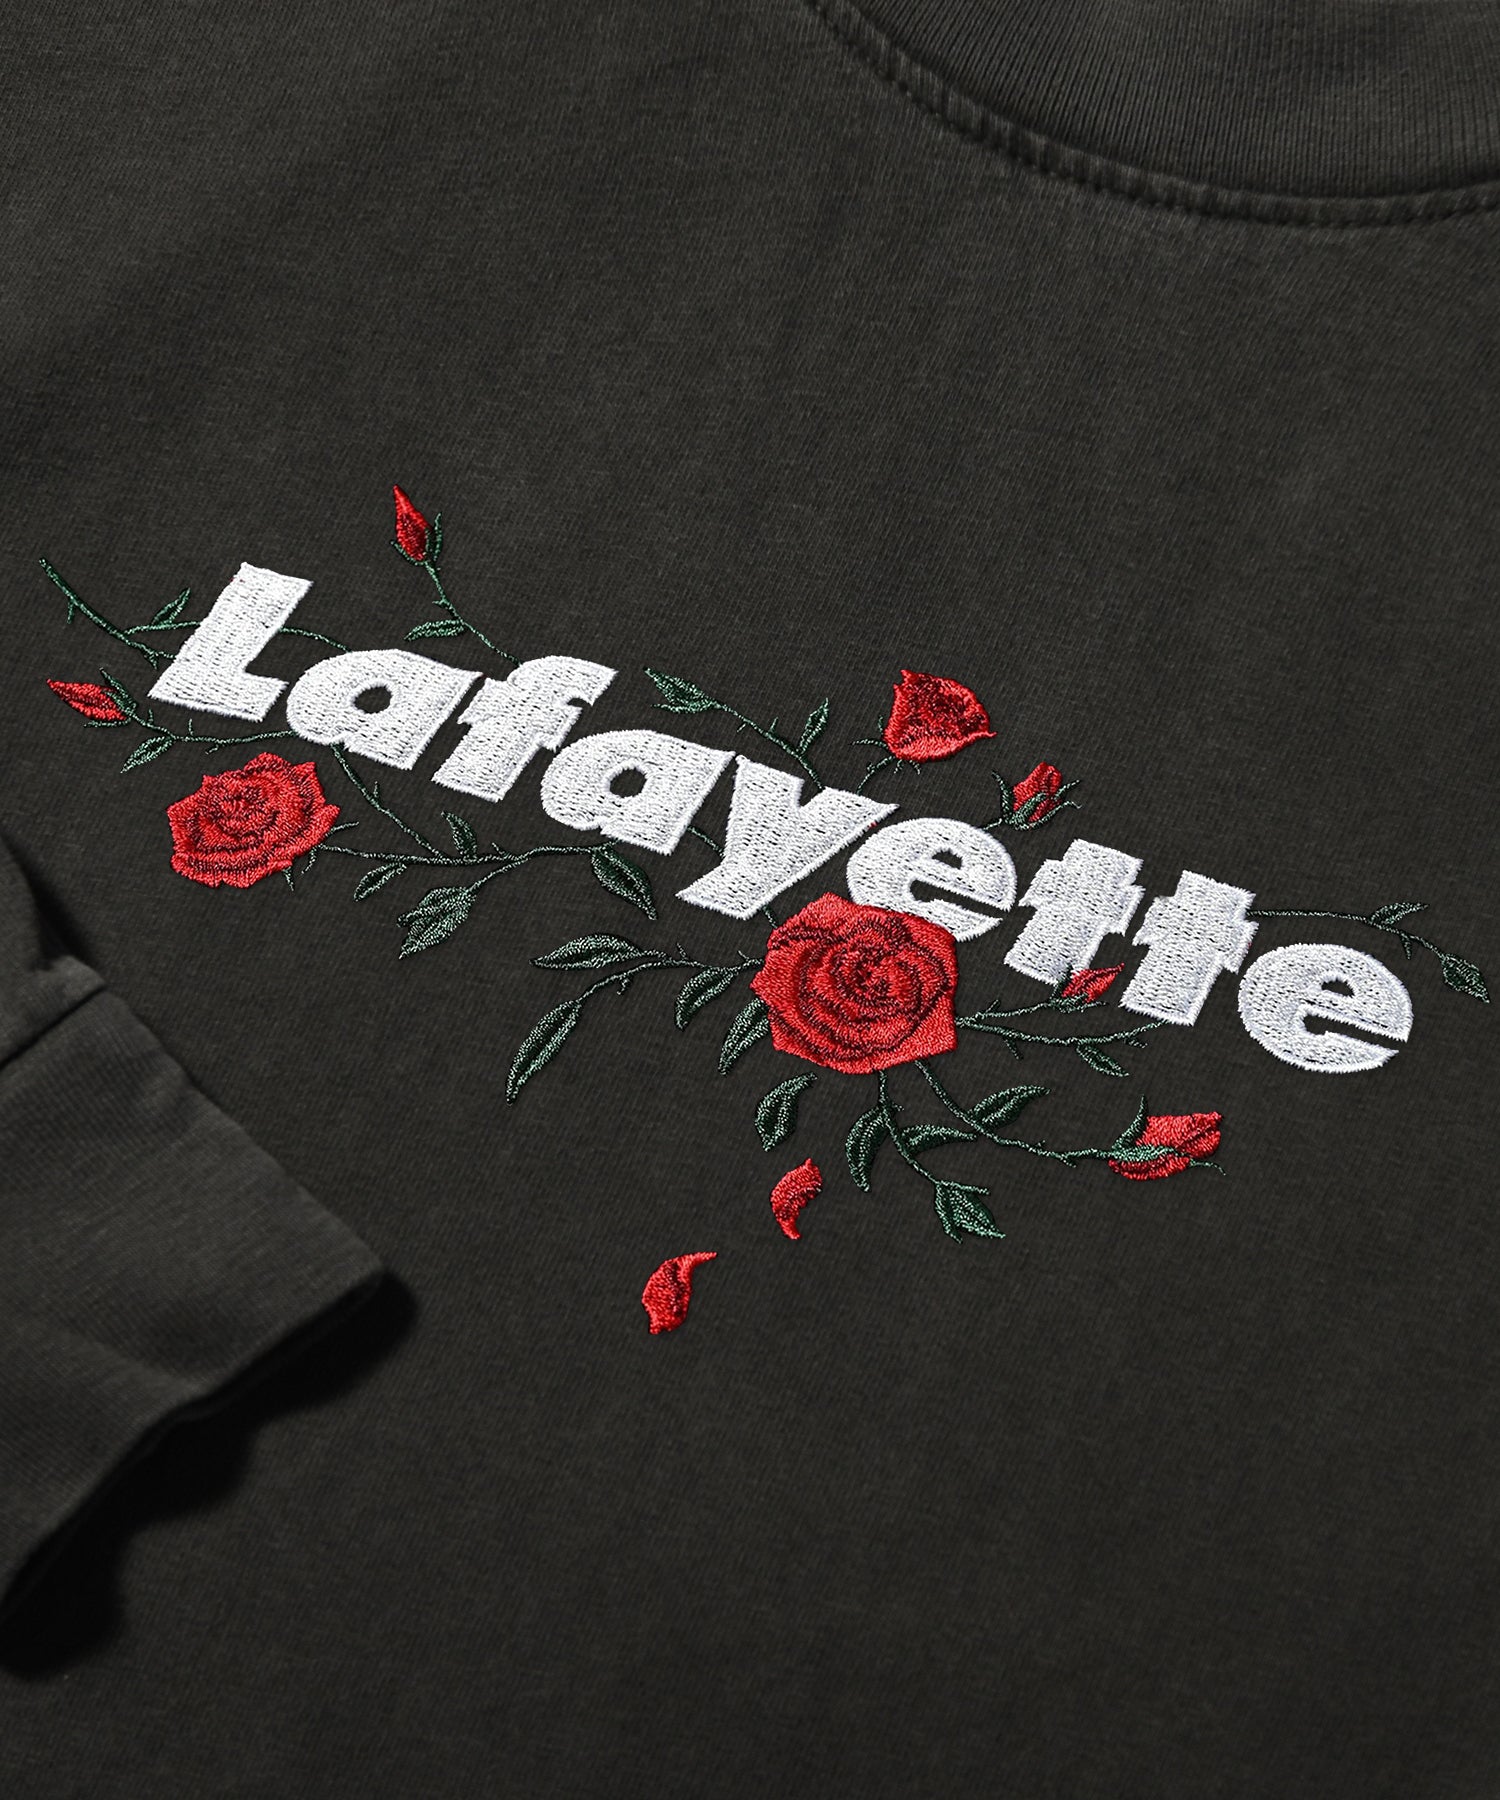 ROSE LOGO PIGMENT DYED L/S TEE LE230102